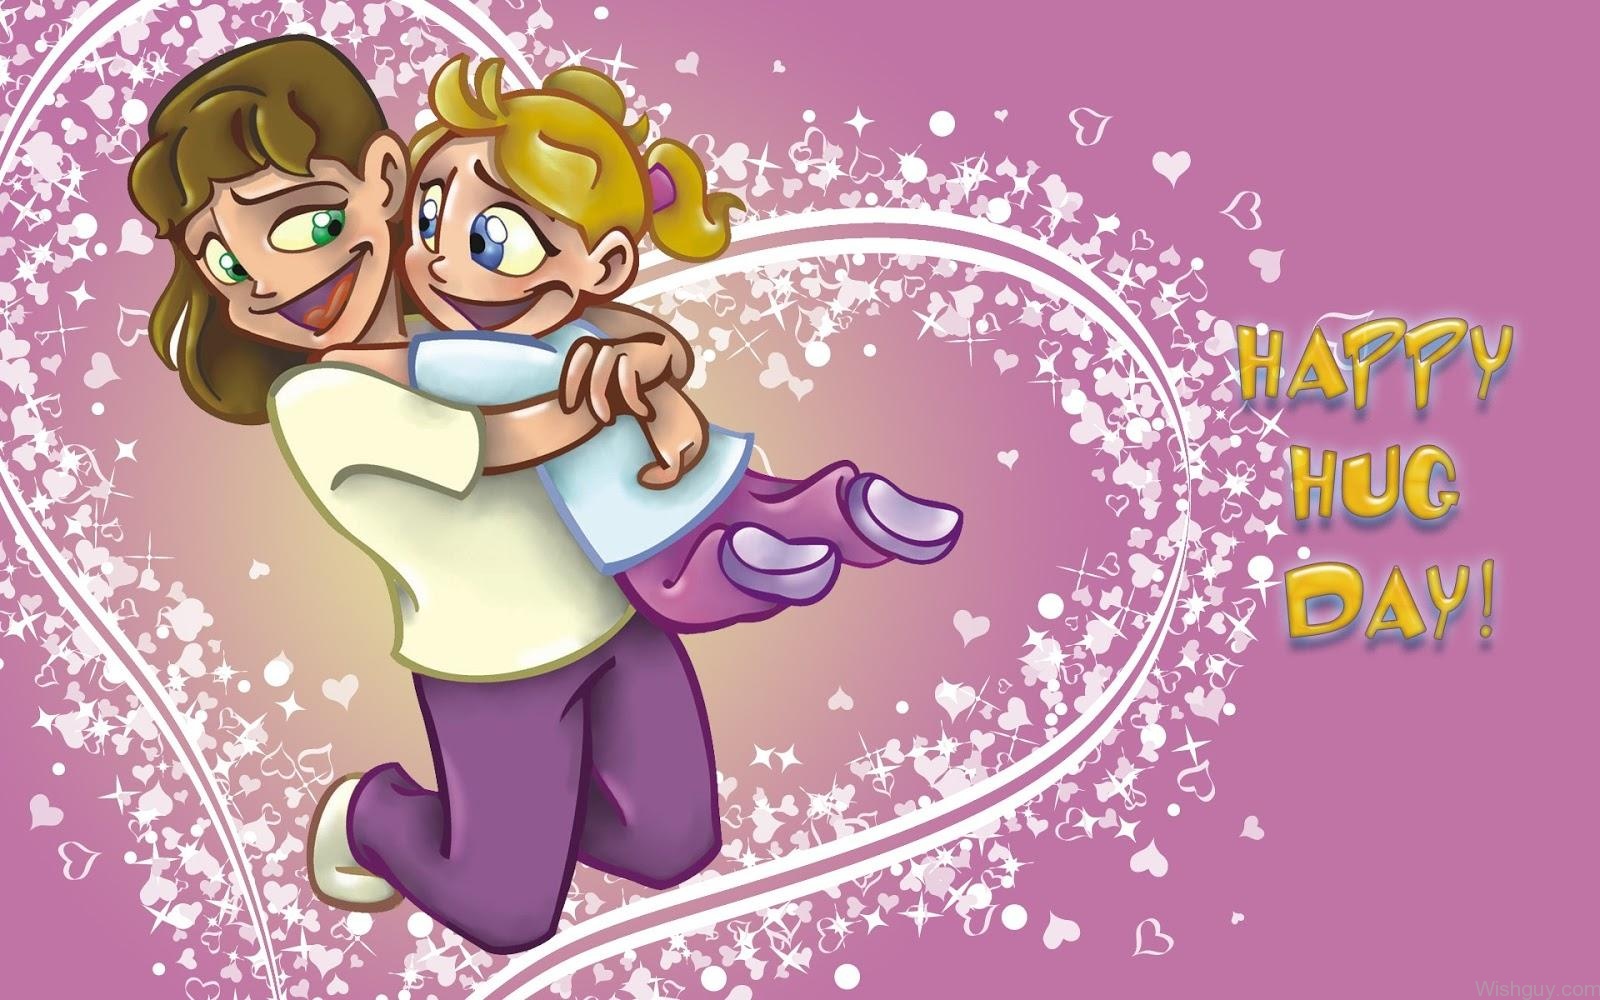 Happy Hug Day Friends - Wishes, Greetings, Pictures – Wish Guy